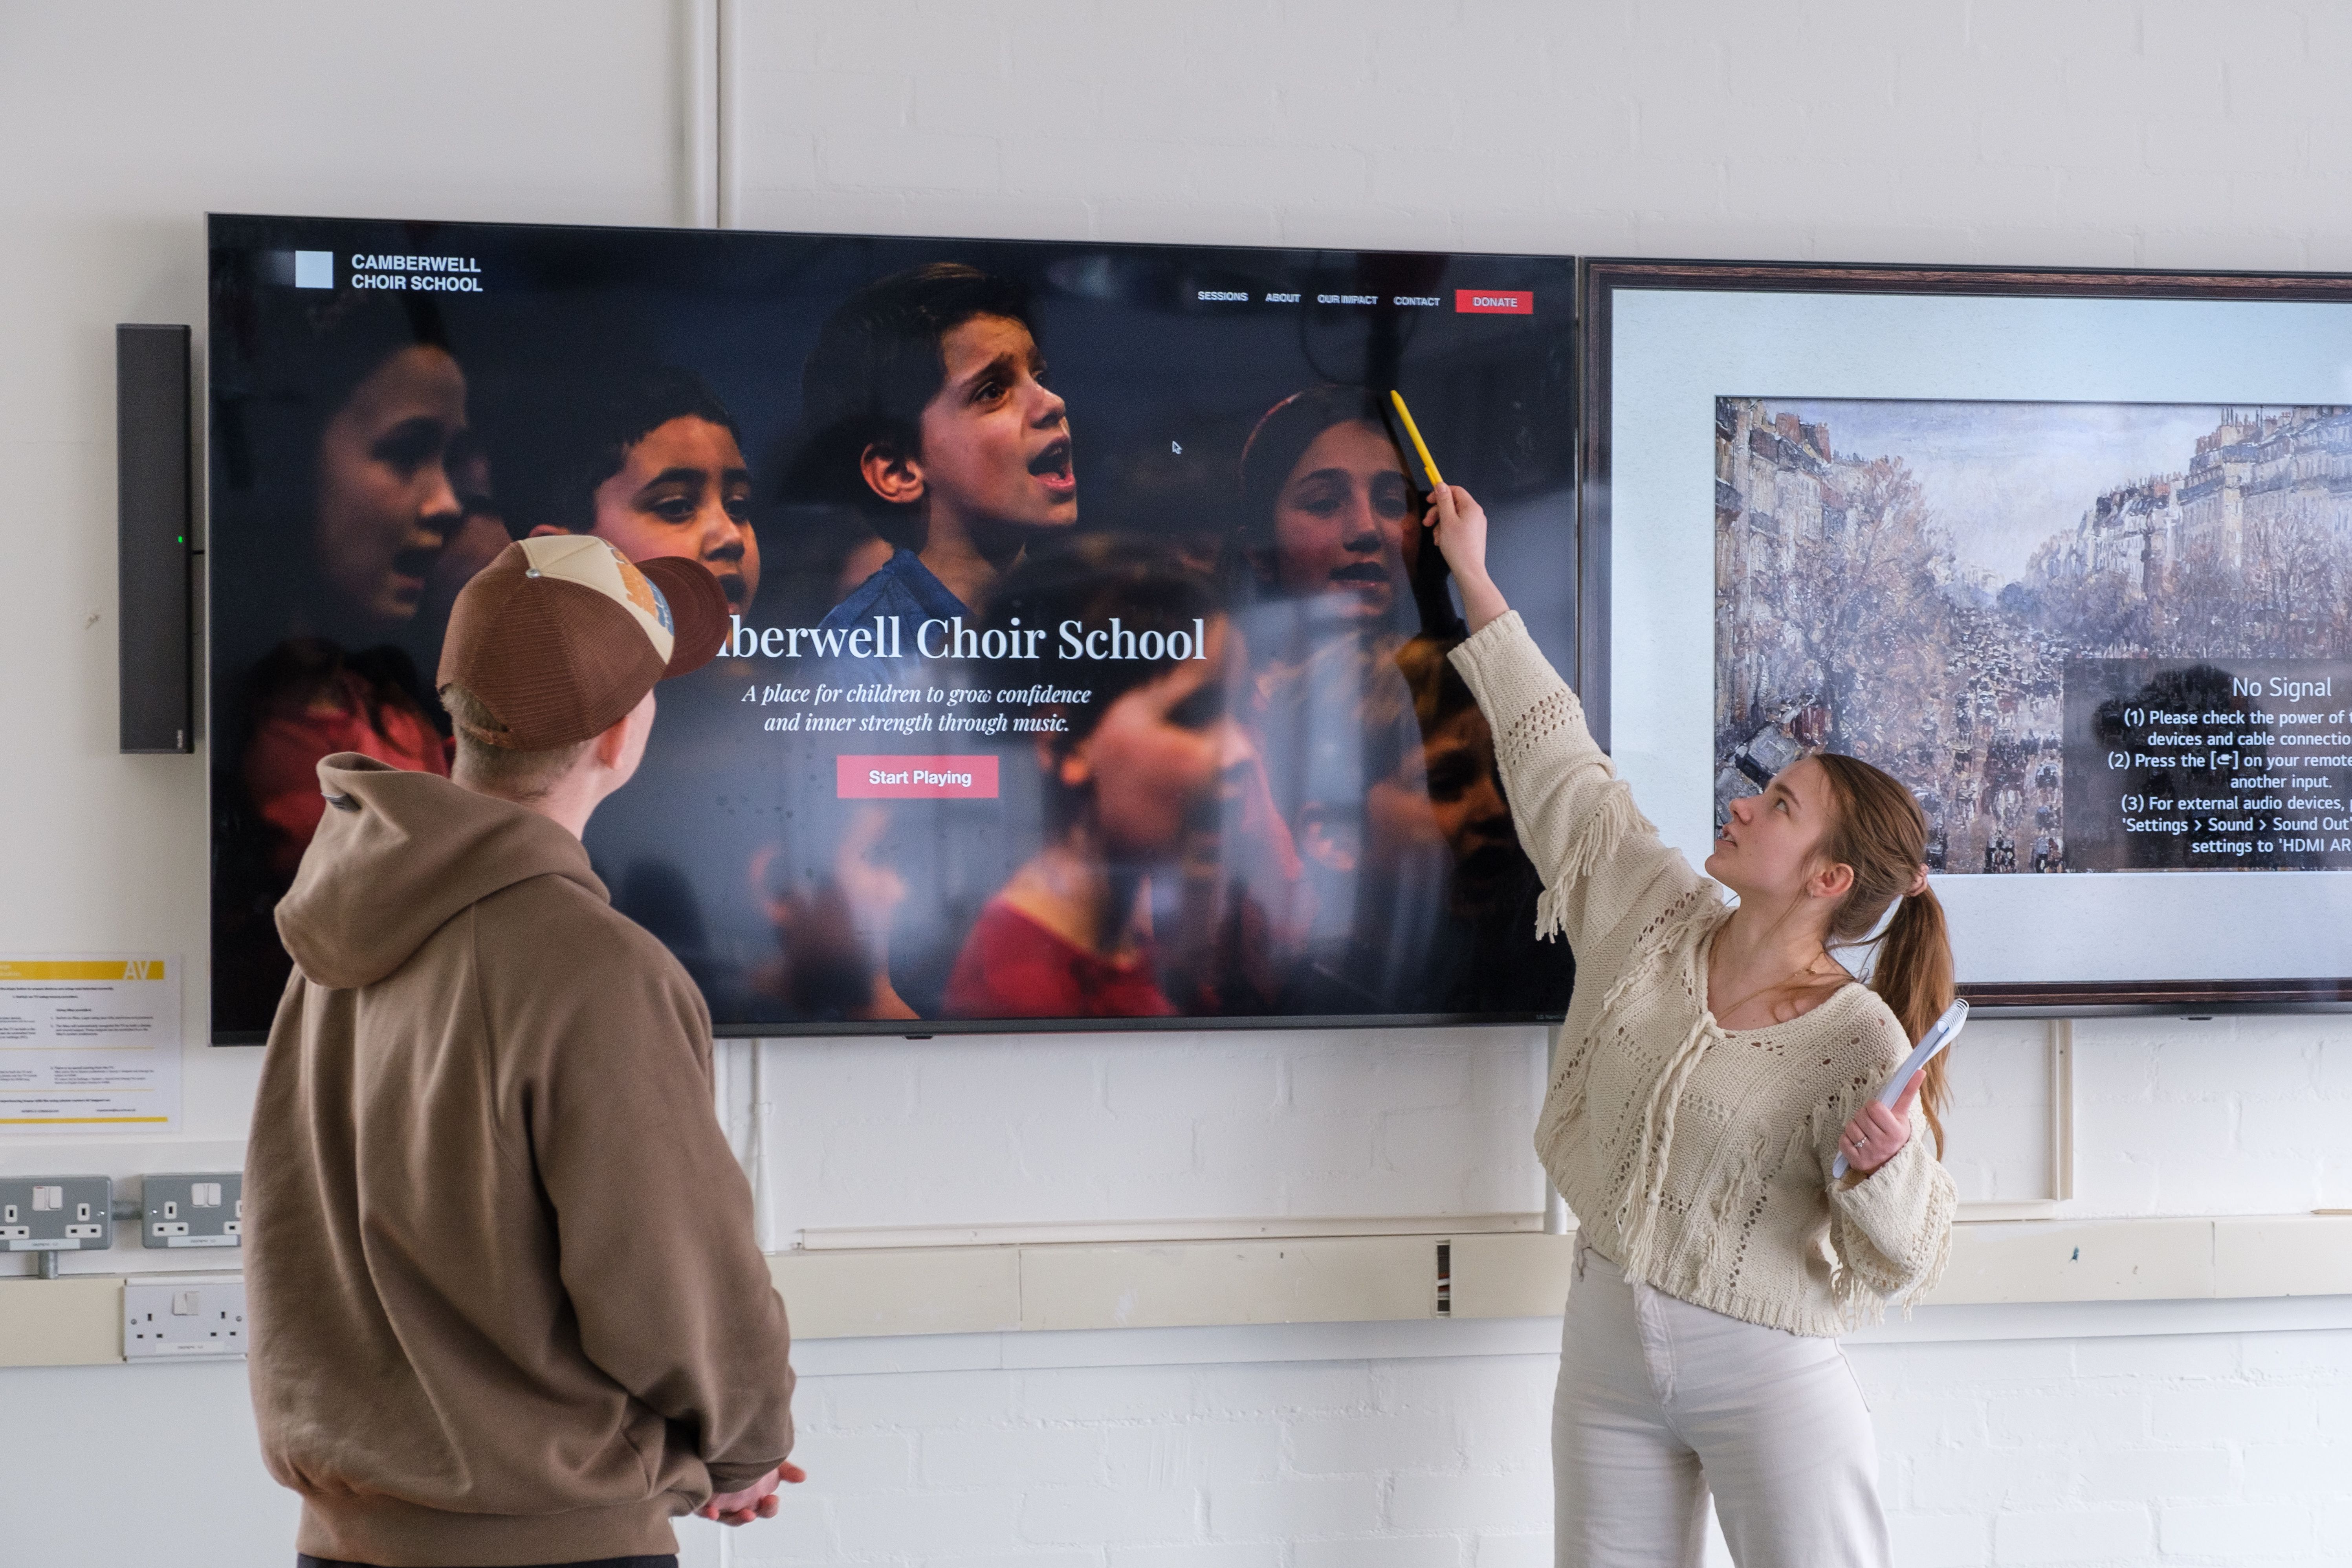 Two students present their website design, one points at a screen on the wall and the other looks in that direction too.